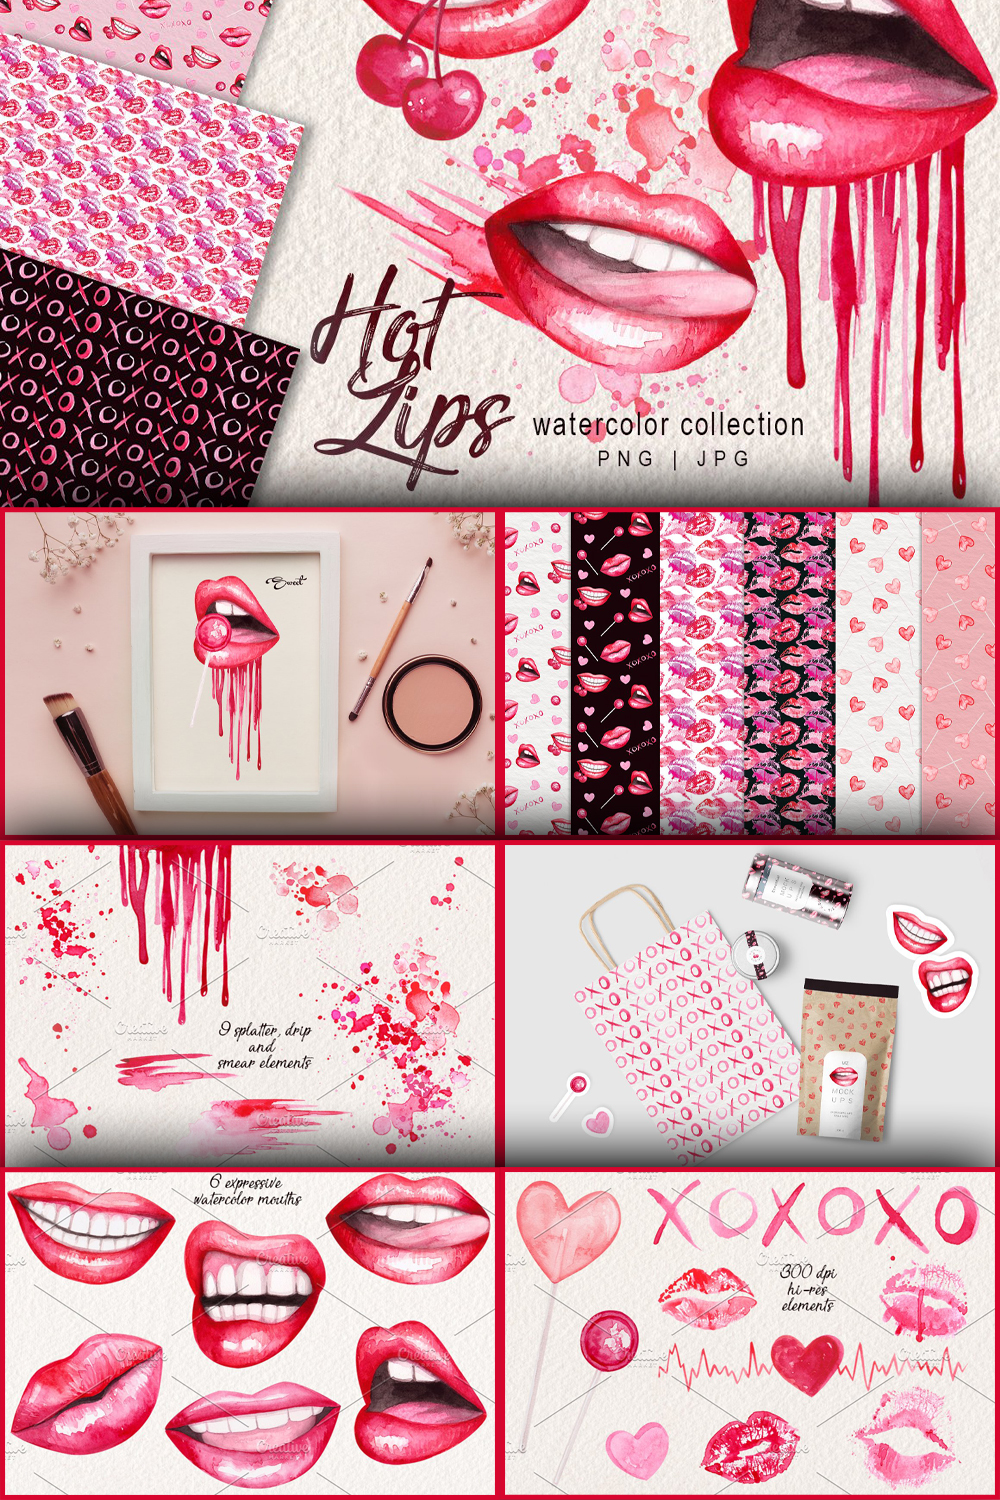 Watercolor lips collection of pinterest.